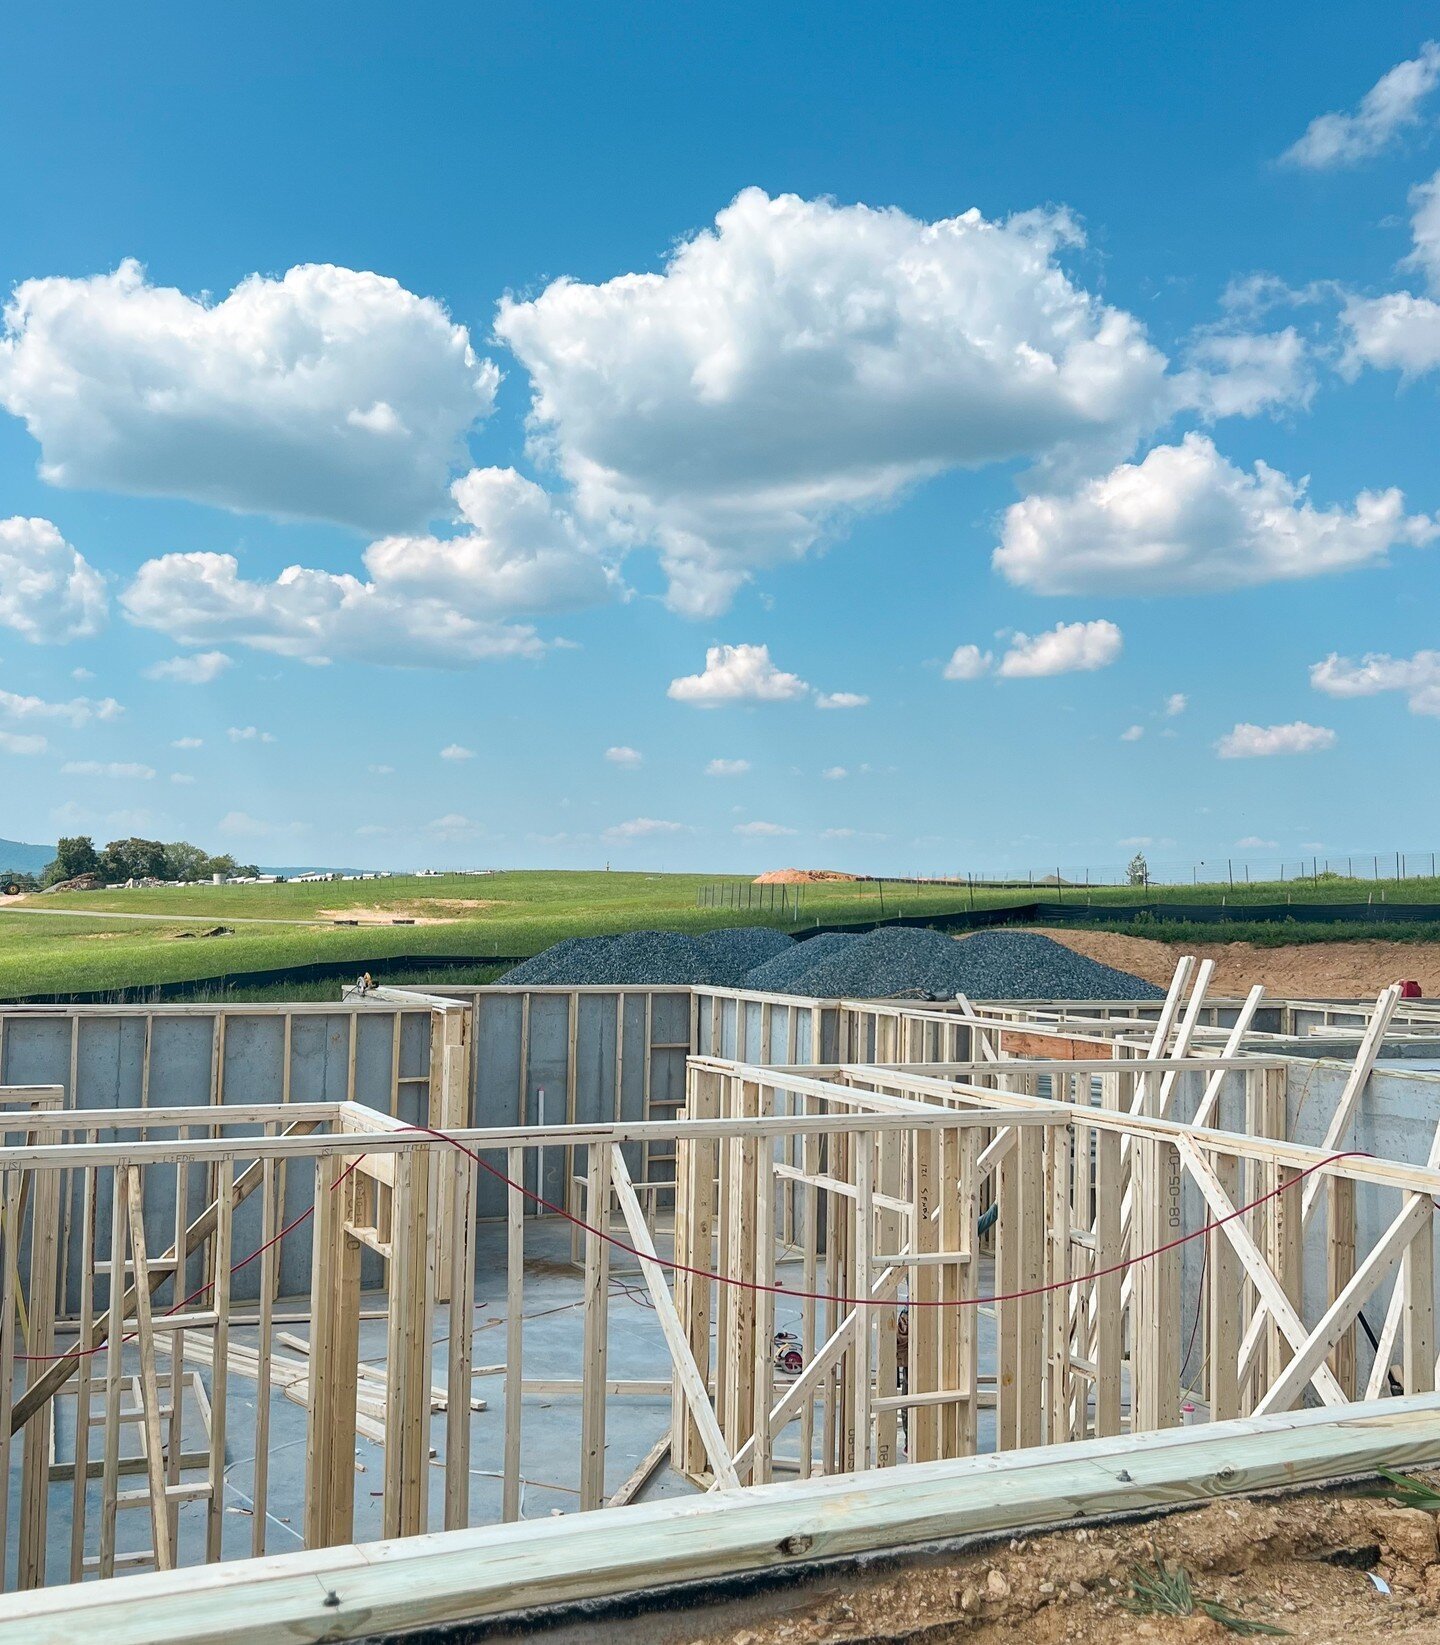 On this #ThrowbackThursday we are throwing it back to the foundation of our first Design+Build custom home at Glenmore Farm. We're excited to be breaking ground on a few more homes over the next few months at this beautiful community. 

Contact us to